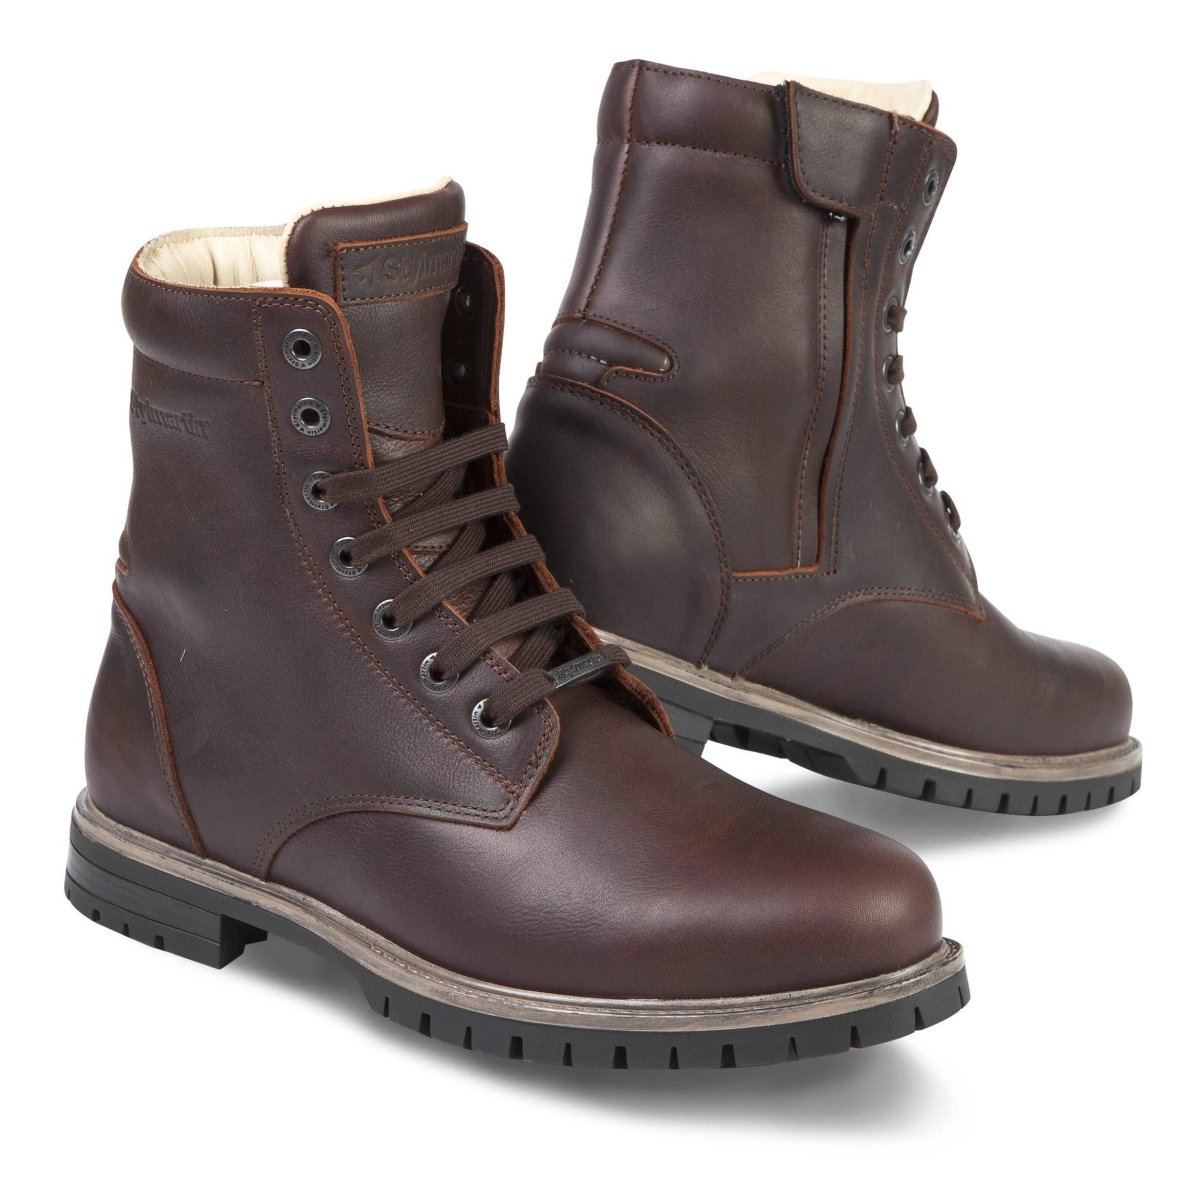 Stylmartin Ace Tan Brown Motorcycle Boots 